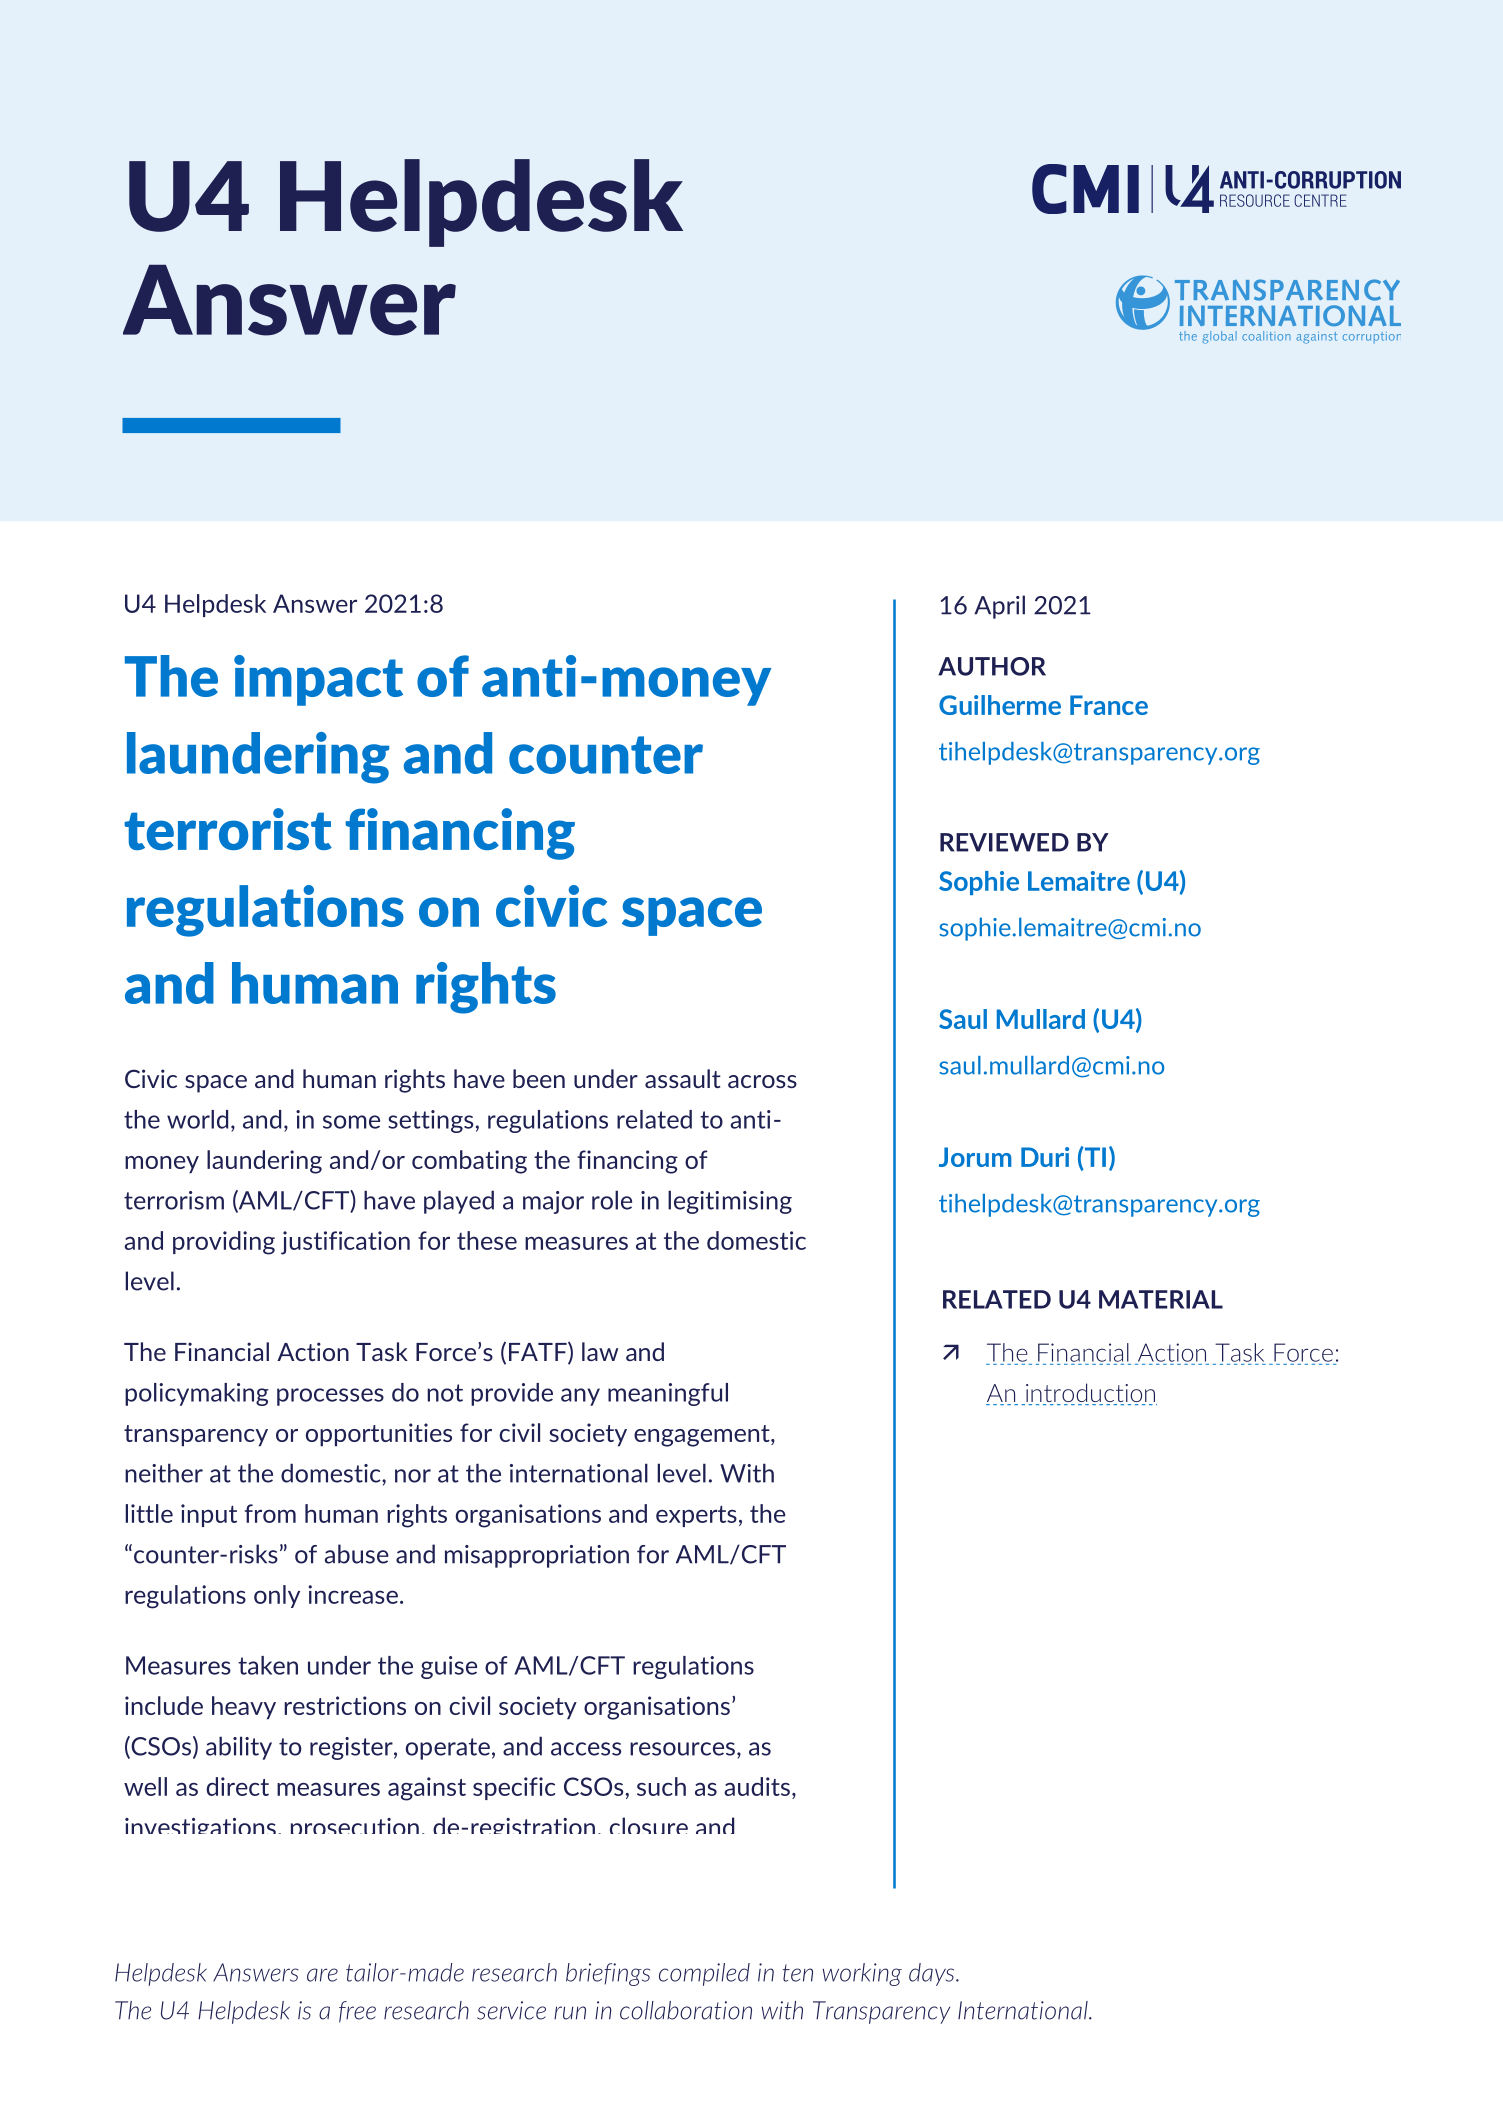 The impact of anti-money laundering and counter terrorist financing regulations on civic space and human rights